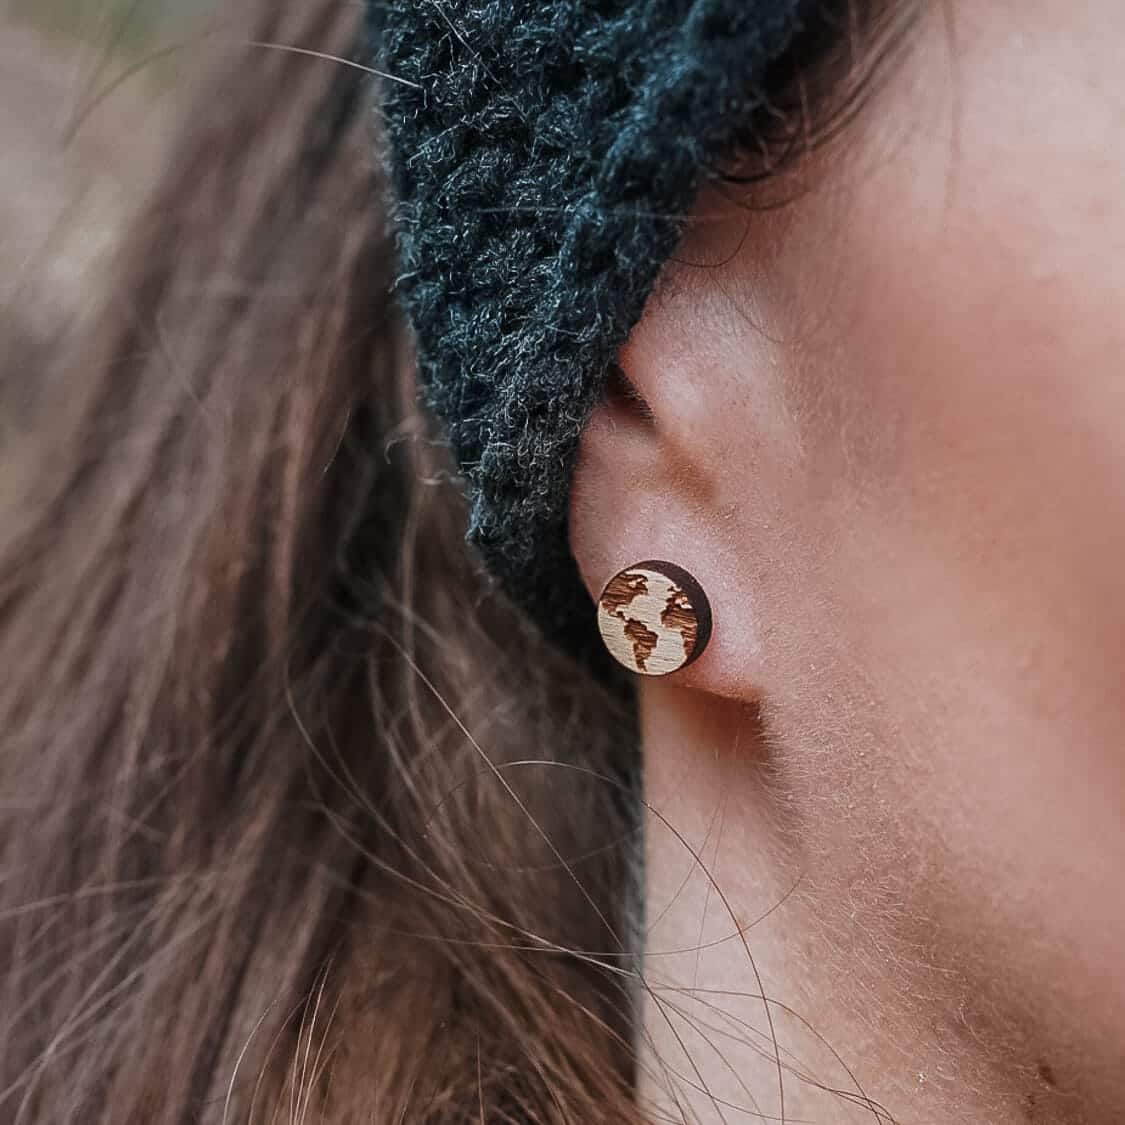 Wooden stud earrings in the shape of the planet Earth